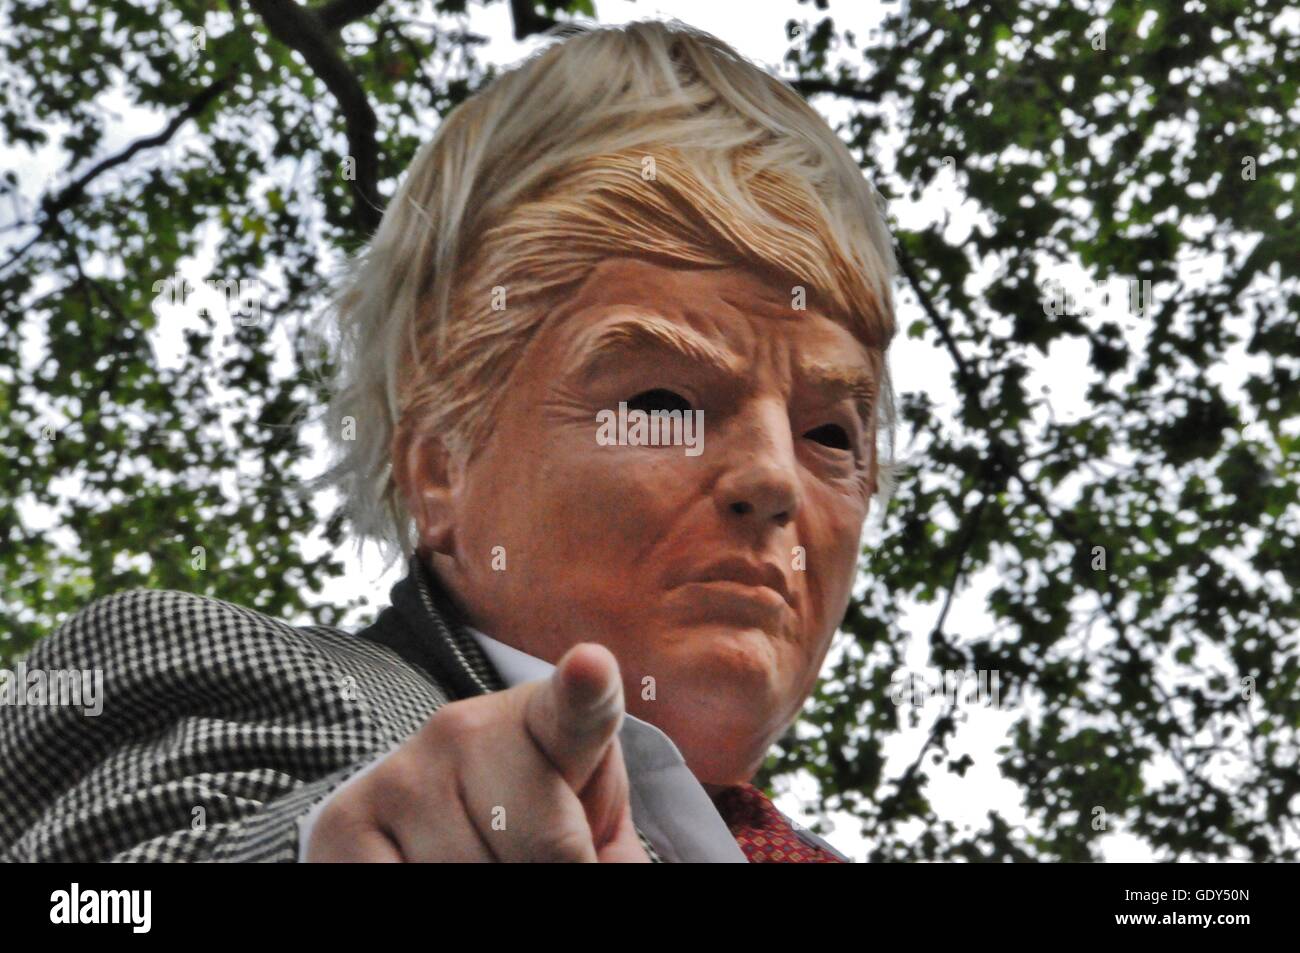 Andrew Webb aka Chopper in Donald Trump mask, rudely points at the camera. Stock Photo